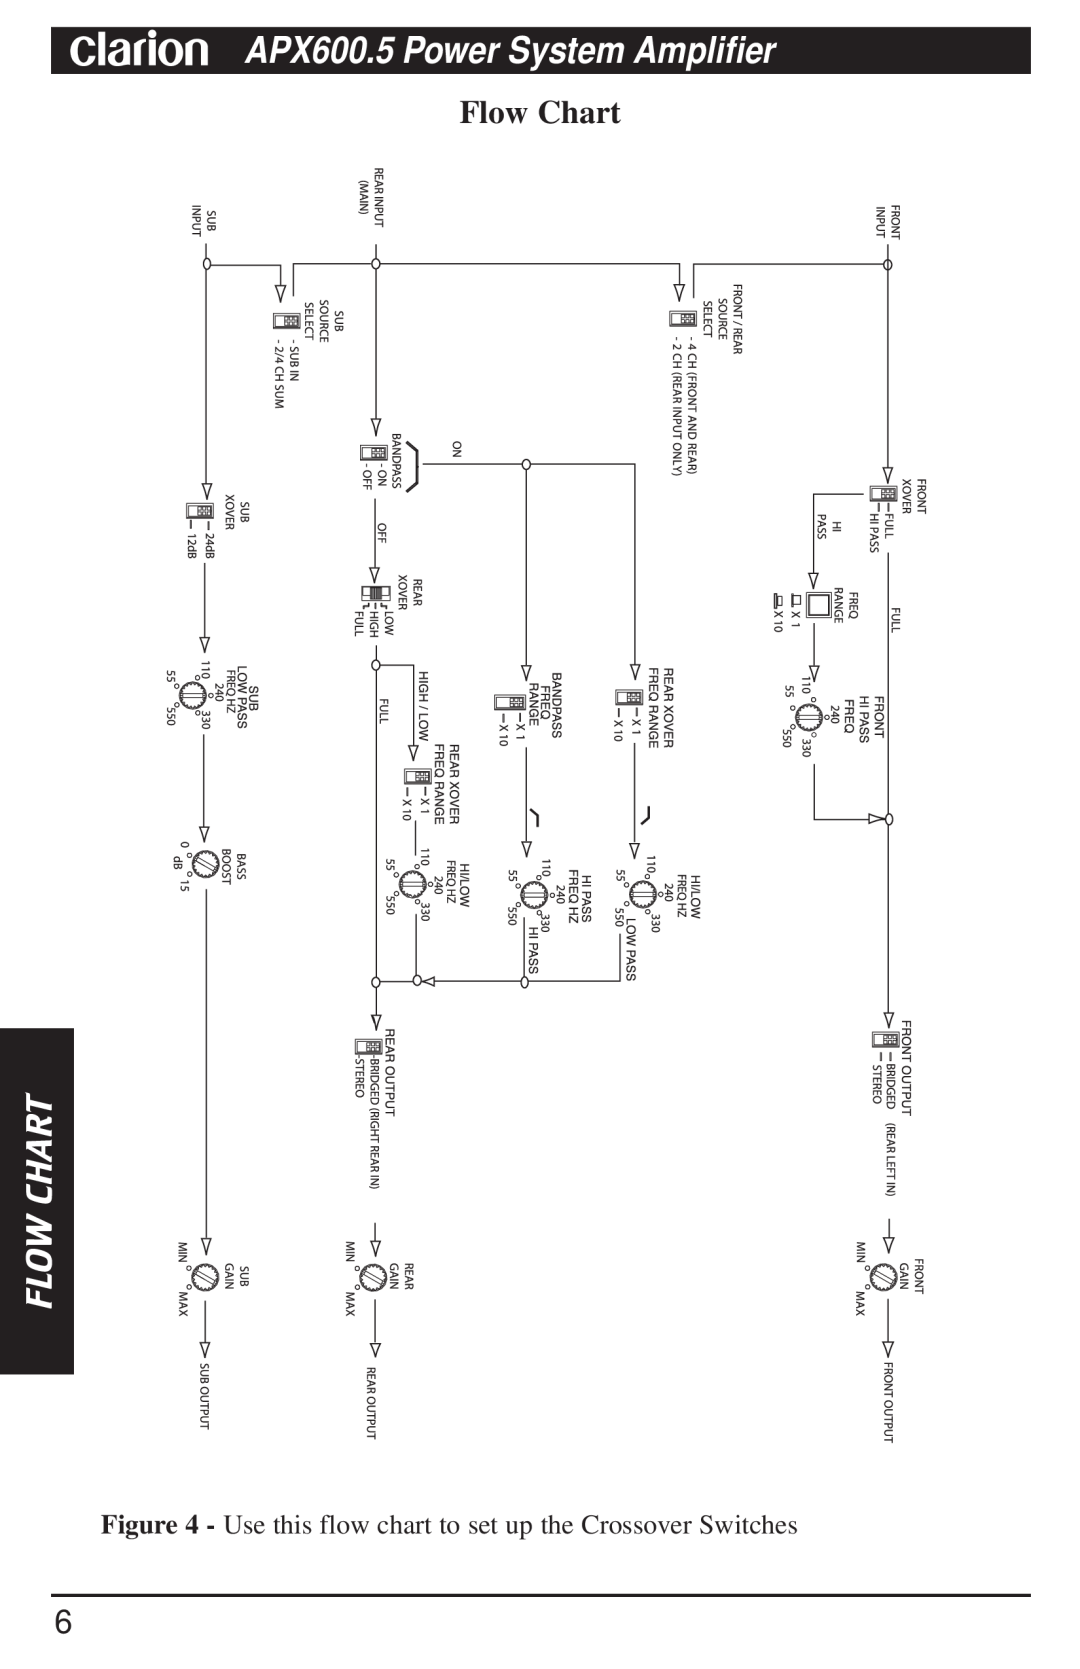 Clarion manual Flow Chart, APX600.5 Power System Amplifier 